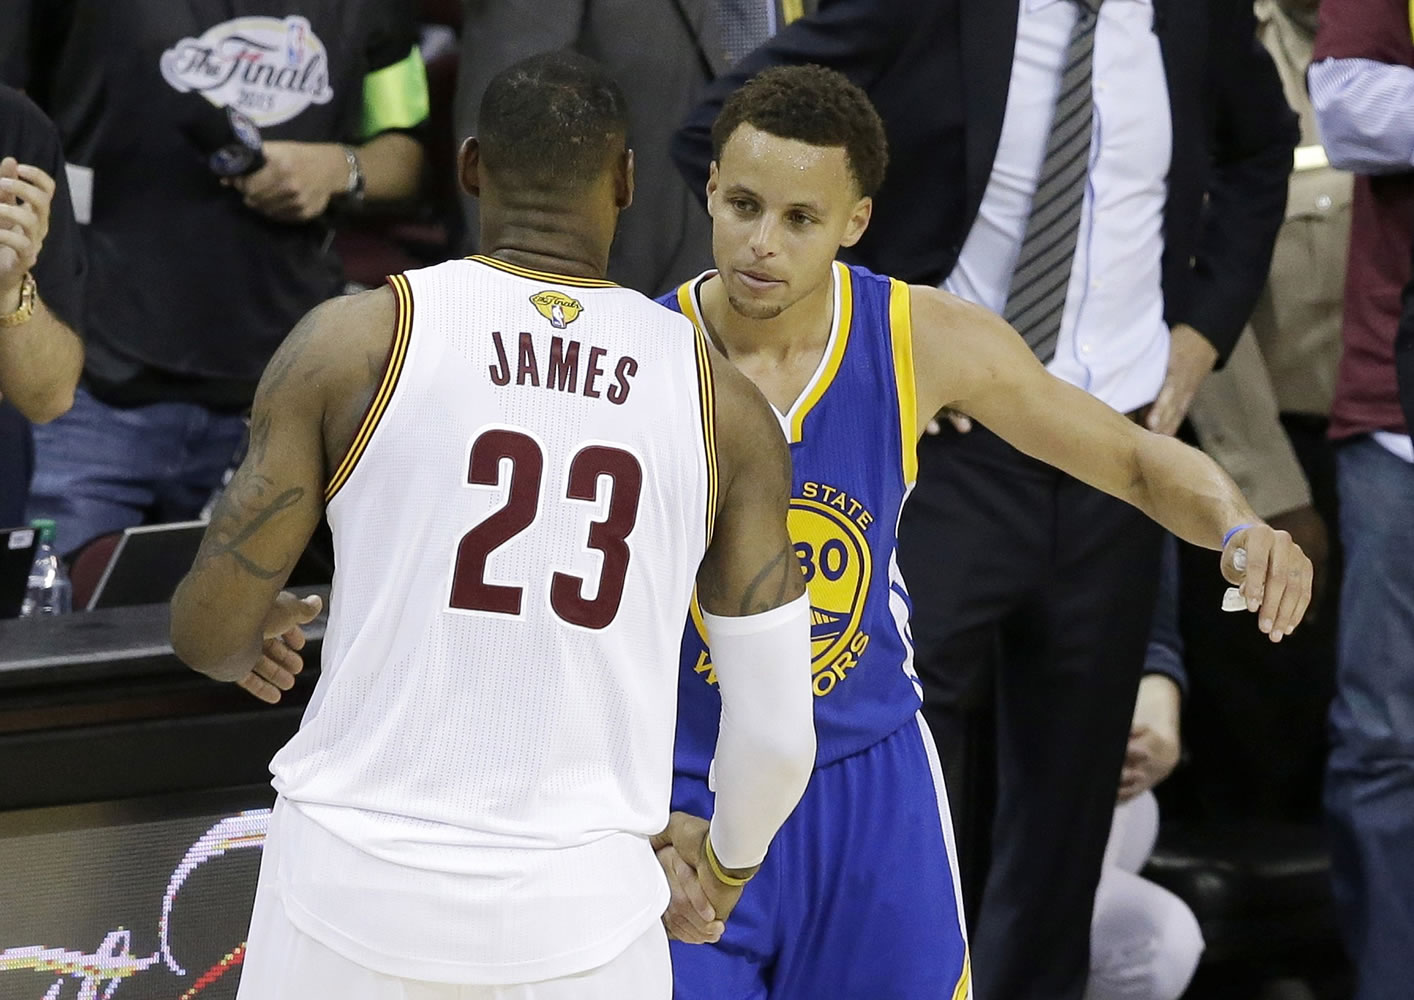 LeBron James leads Cavaliers past Warriors to win historic NBA